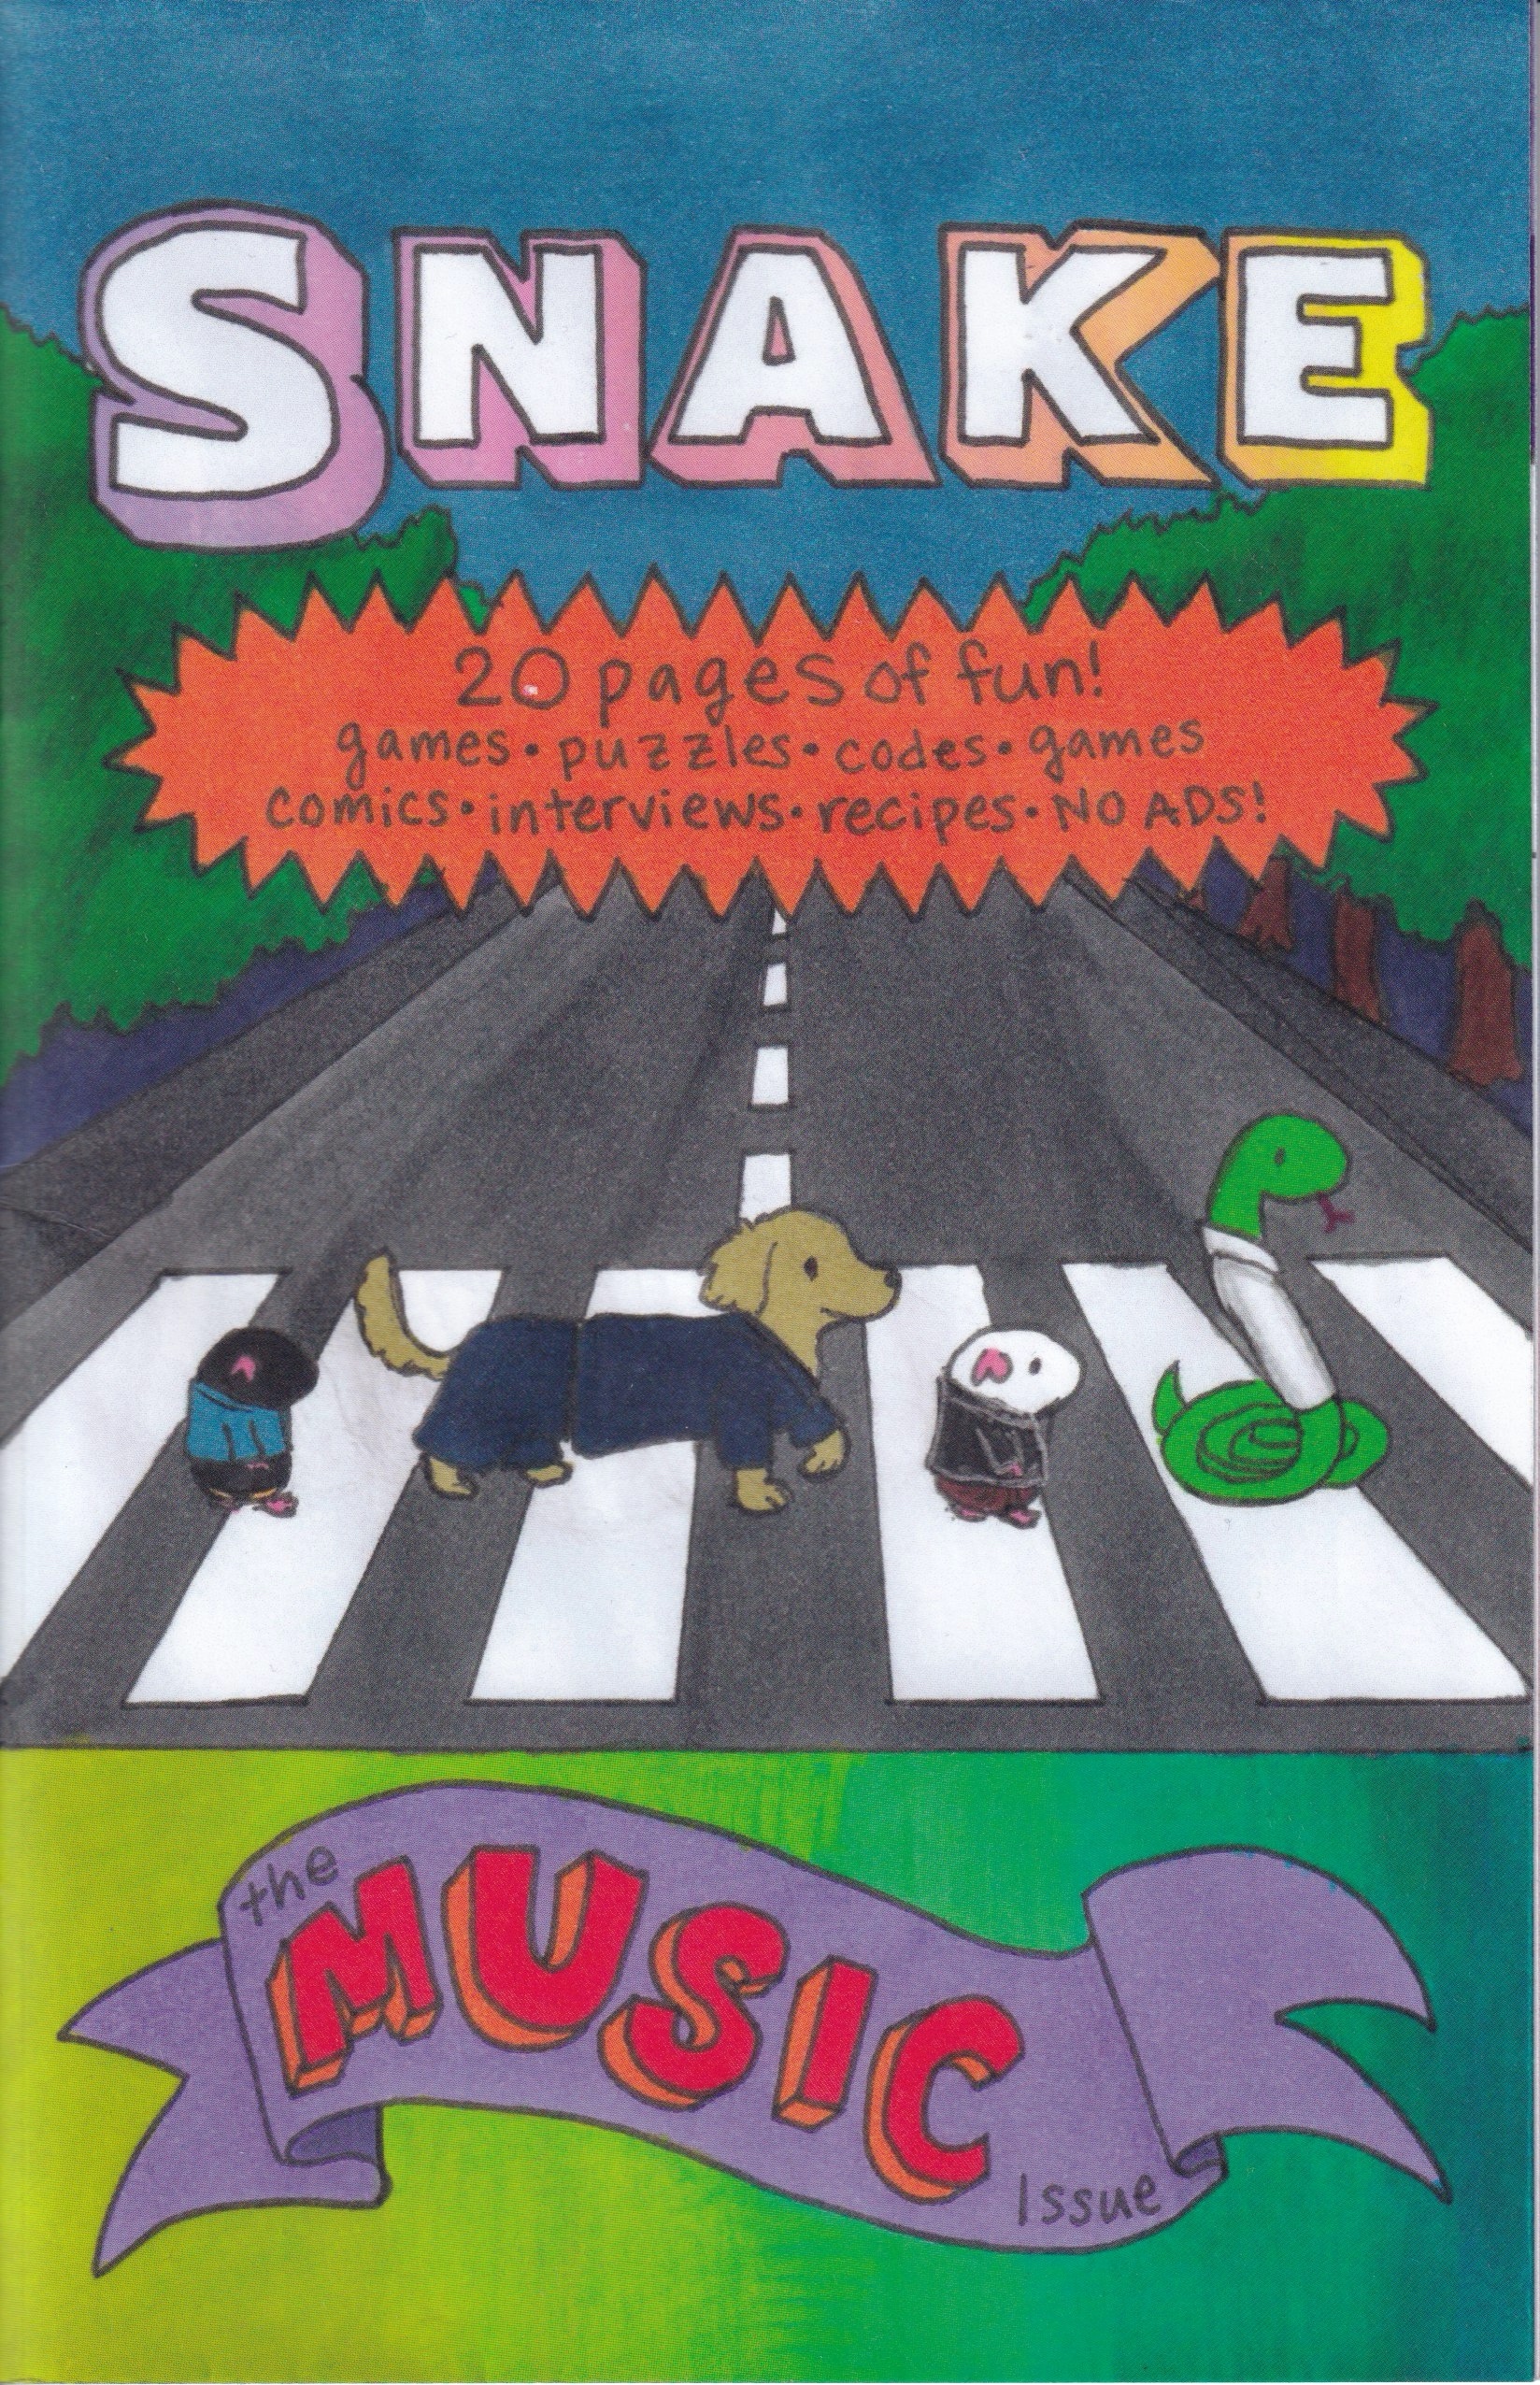 The cover of the Music Issue, showing two guinea pigs, a dachshund, and a snake crossing Abbey Road. All the animals are in suits. Beneath the picture are the words 